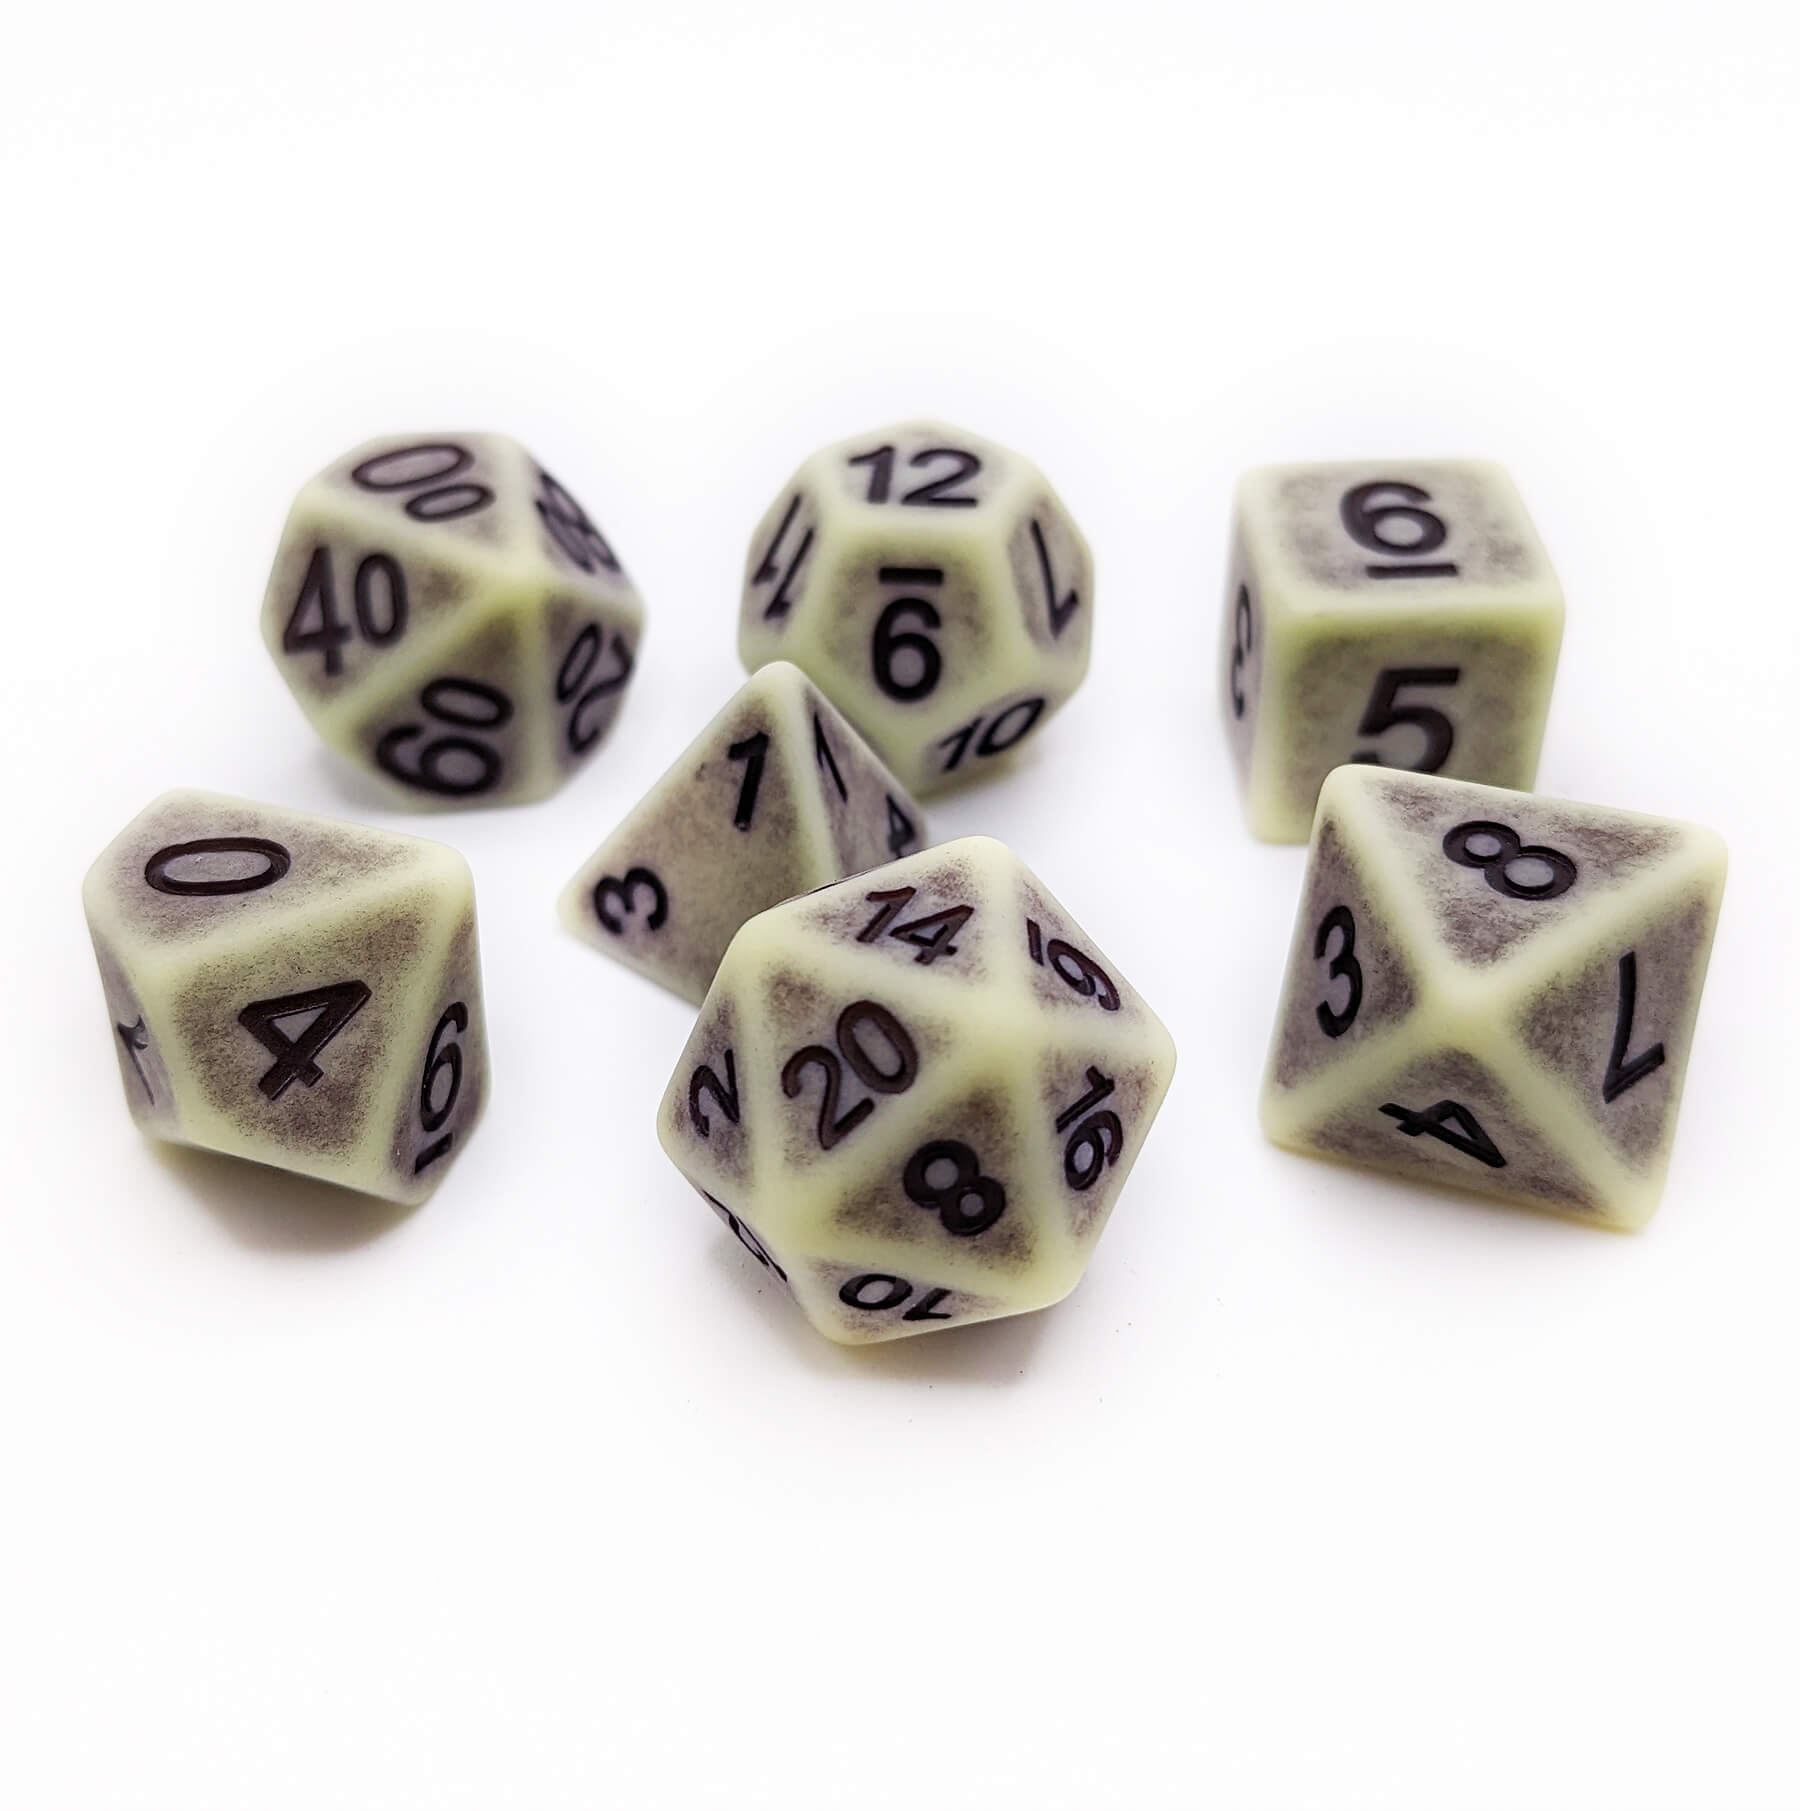 Ancient Dice III (Wytch Bone) RPG Role Playing Game Dice Set